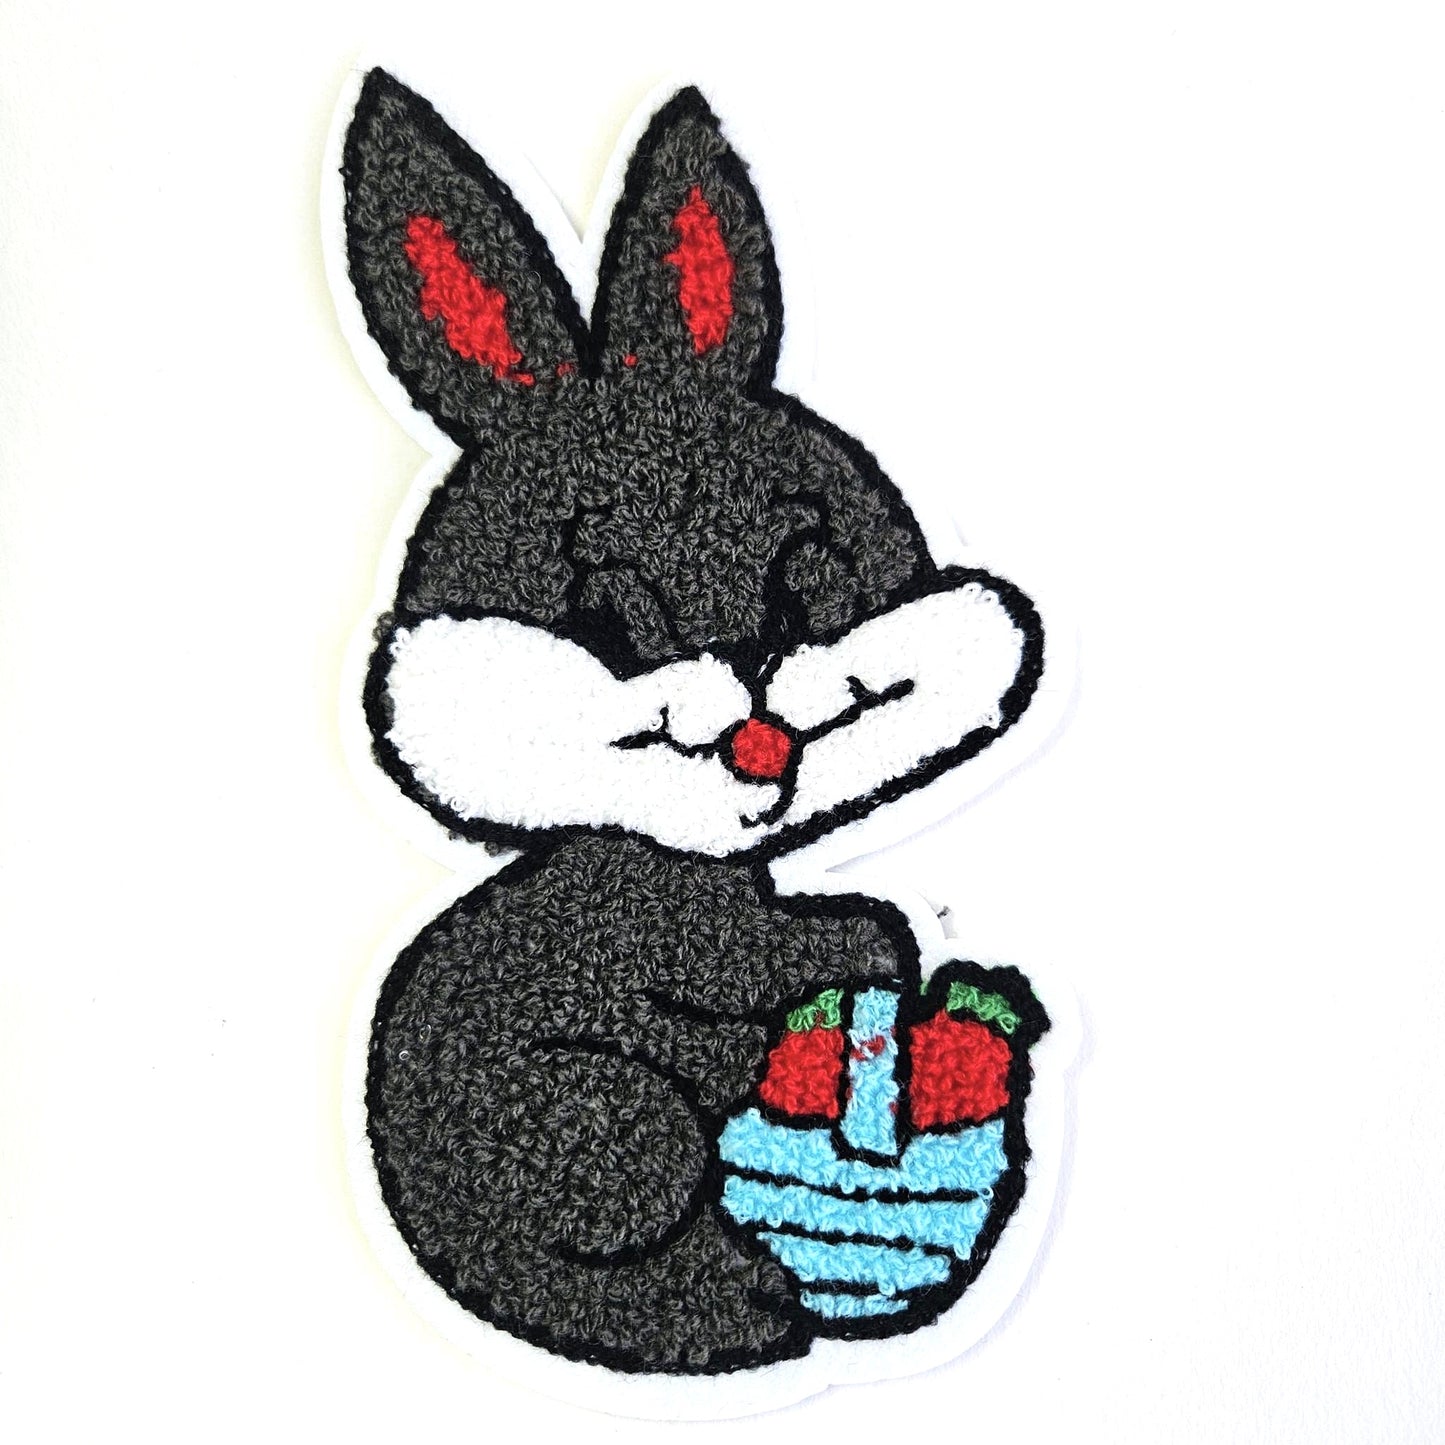 Sew Cool - Sew on Applique Needle Punch Rabbit